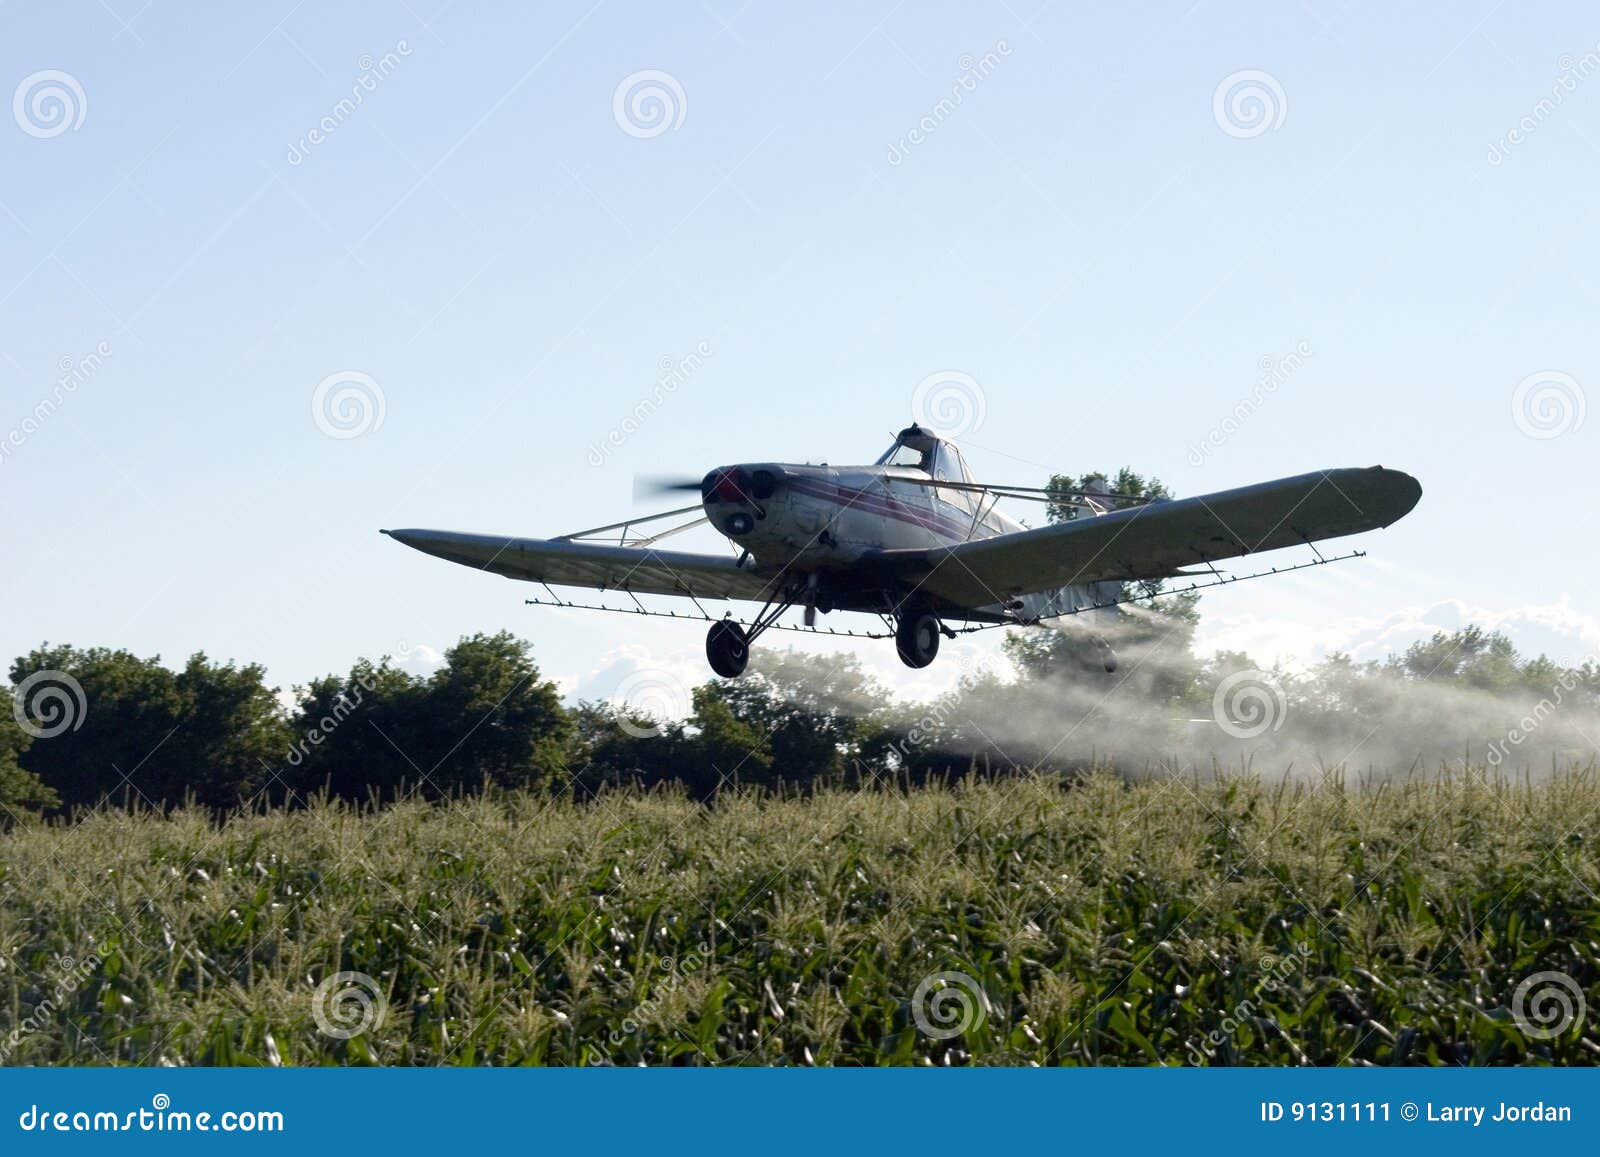 crop duster action